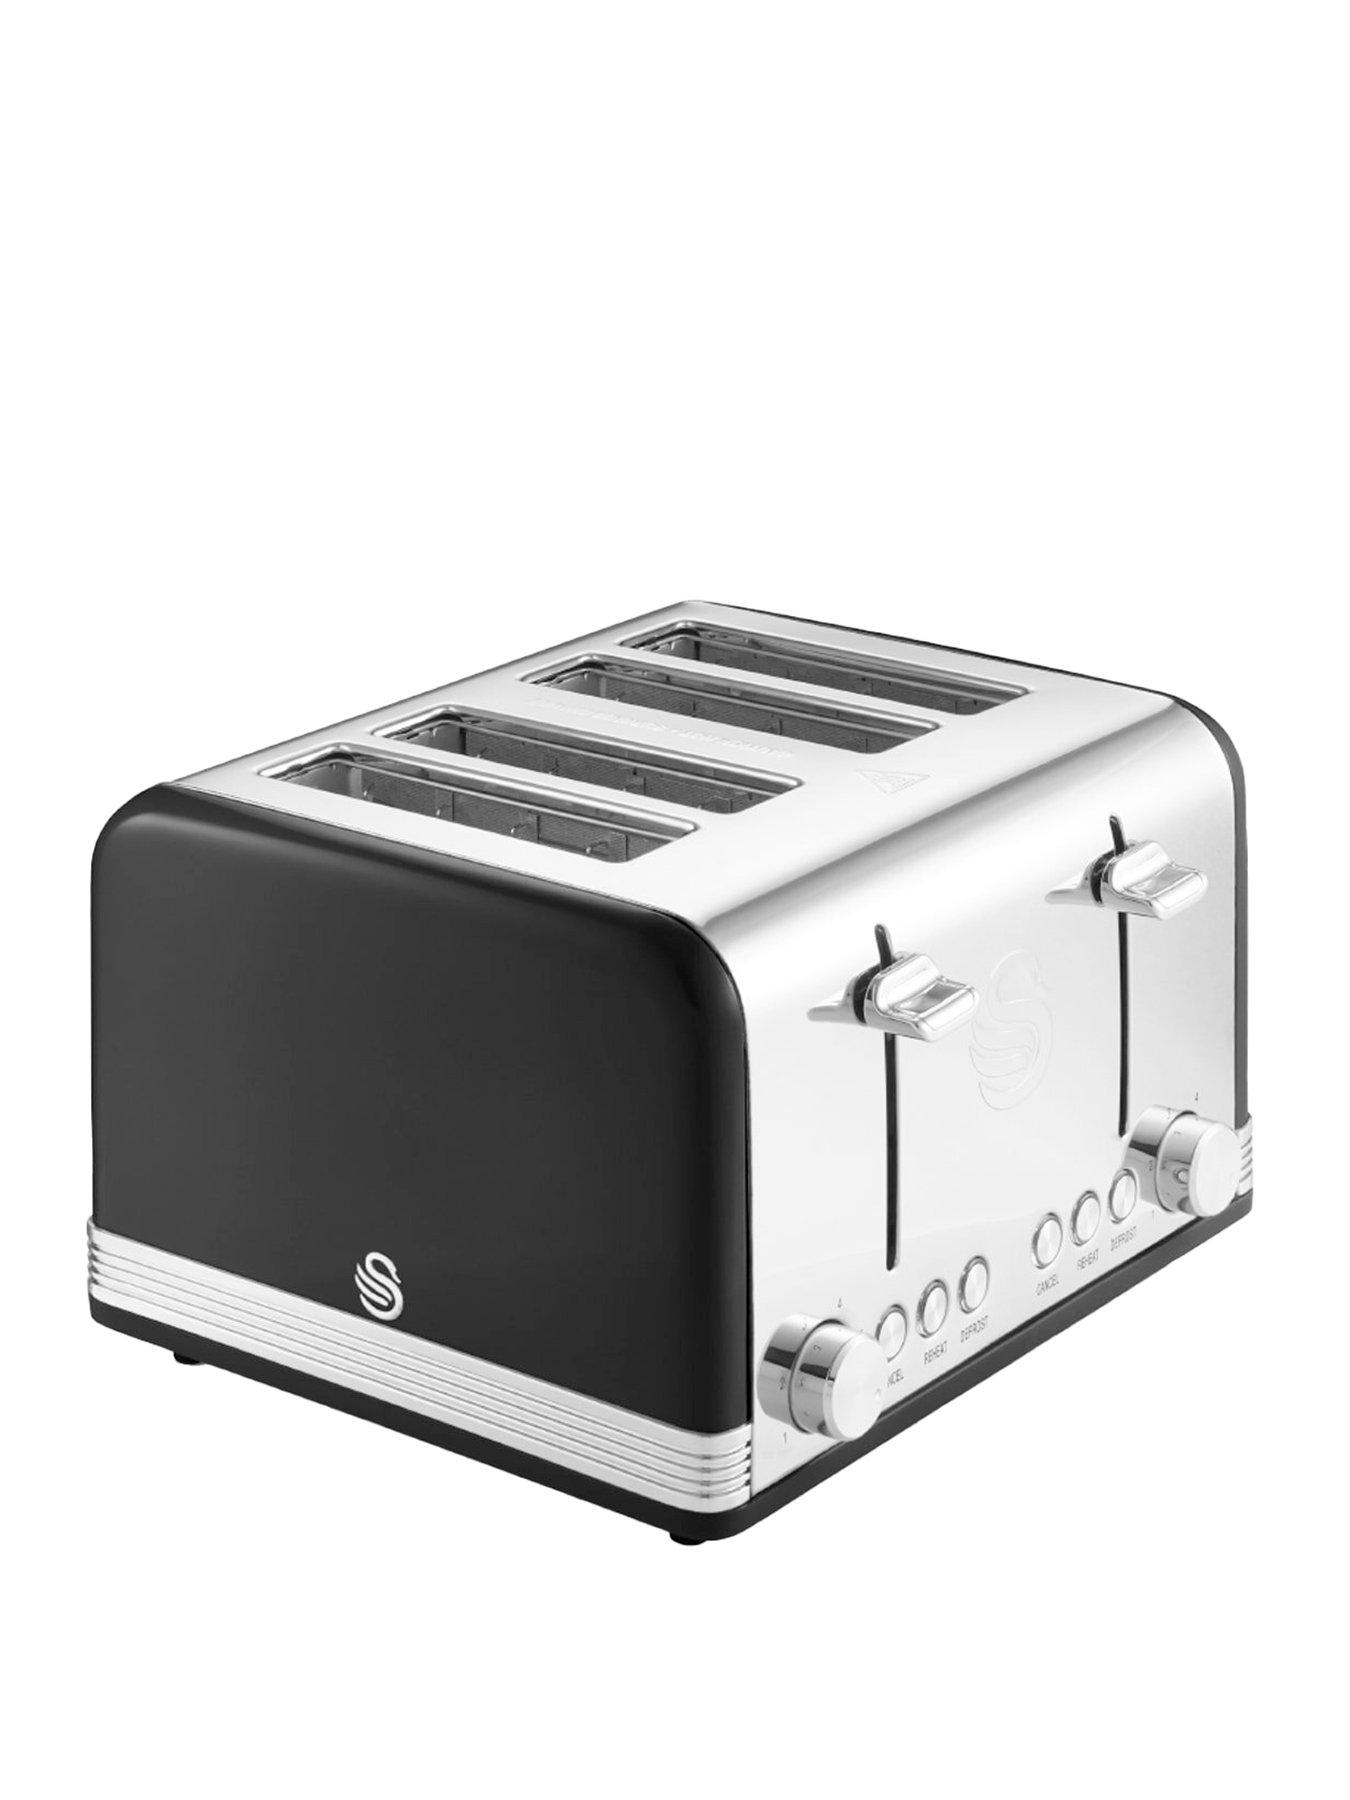 Swan St19020Bn Retro 4-Slice Toaster With Defrost/Reheat/Cancel Functions, Cord Storage, 1600W, Black